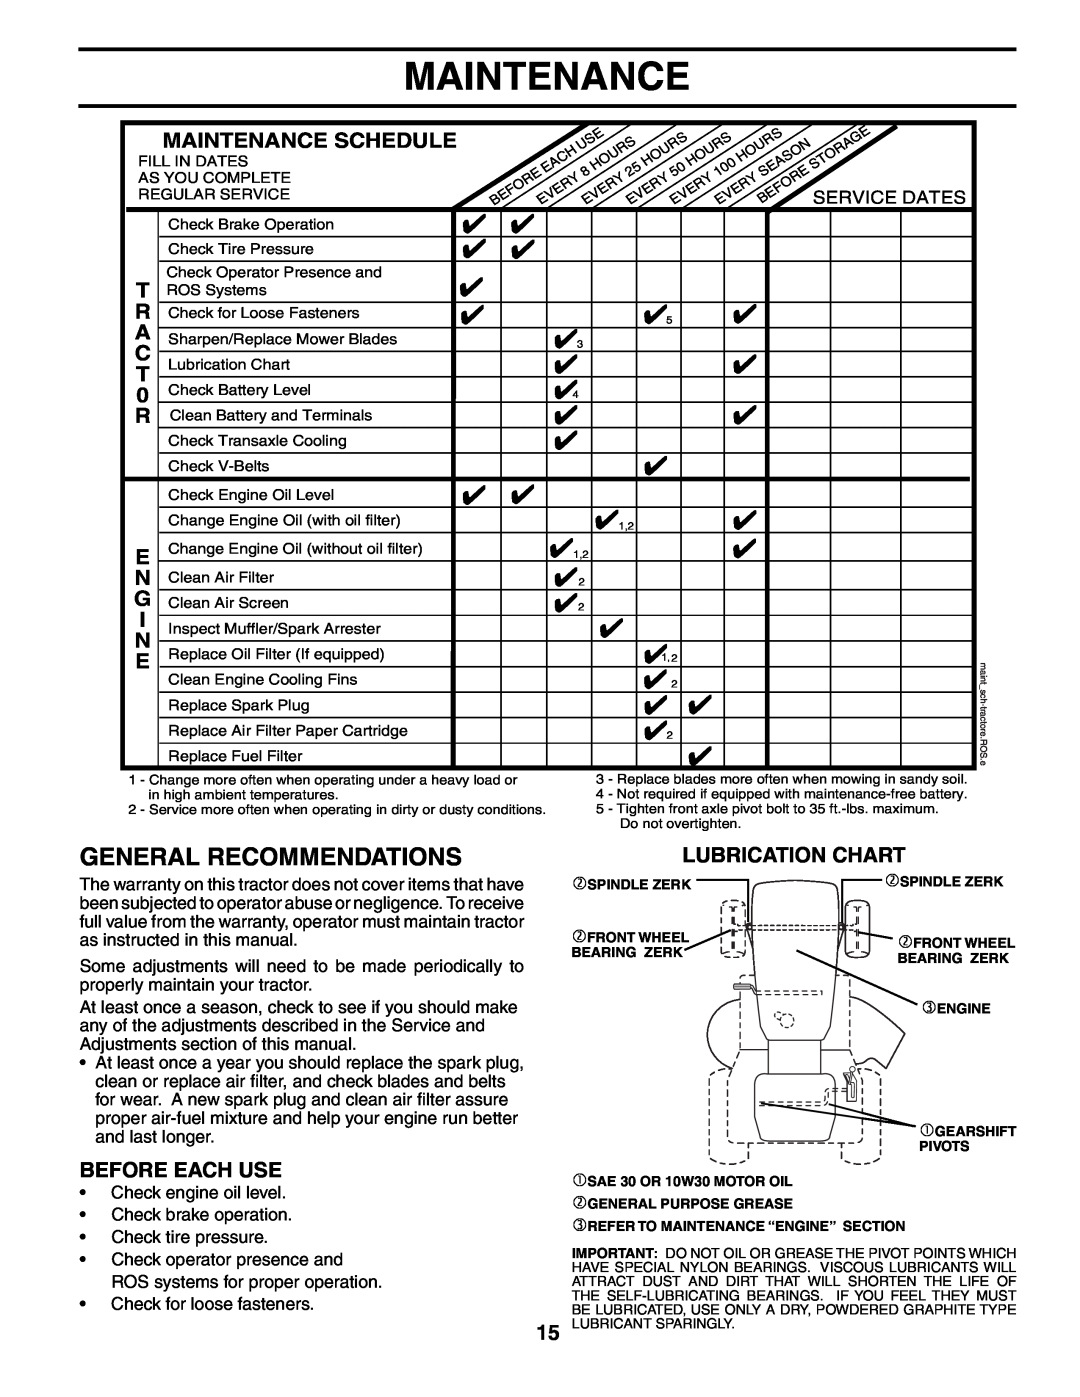 Poulan HD13538 manual General Recommendations, Before Each Use, Lubrication Chart, Maintenance Schedule 